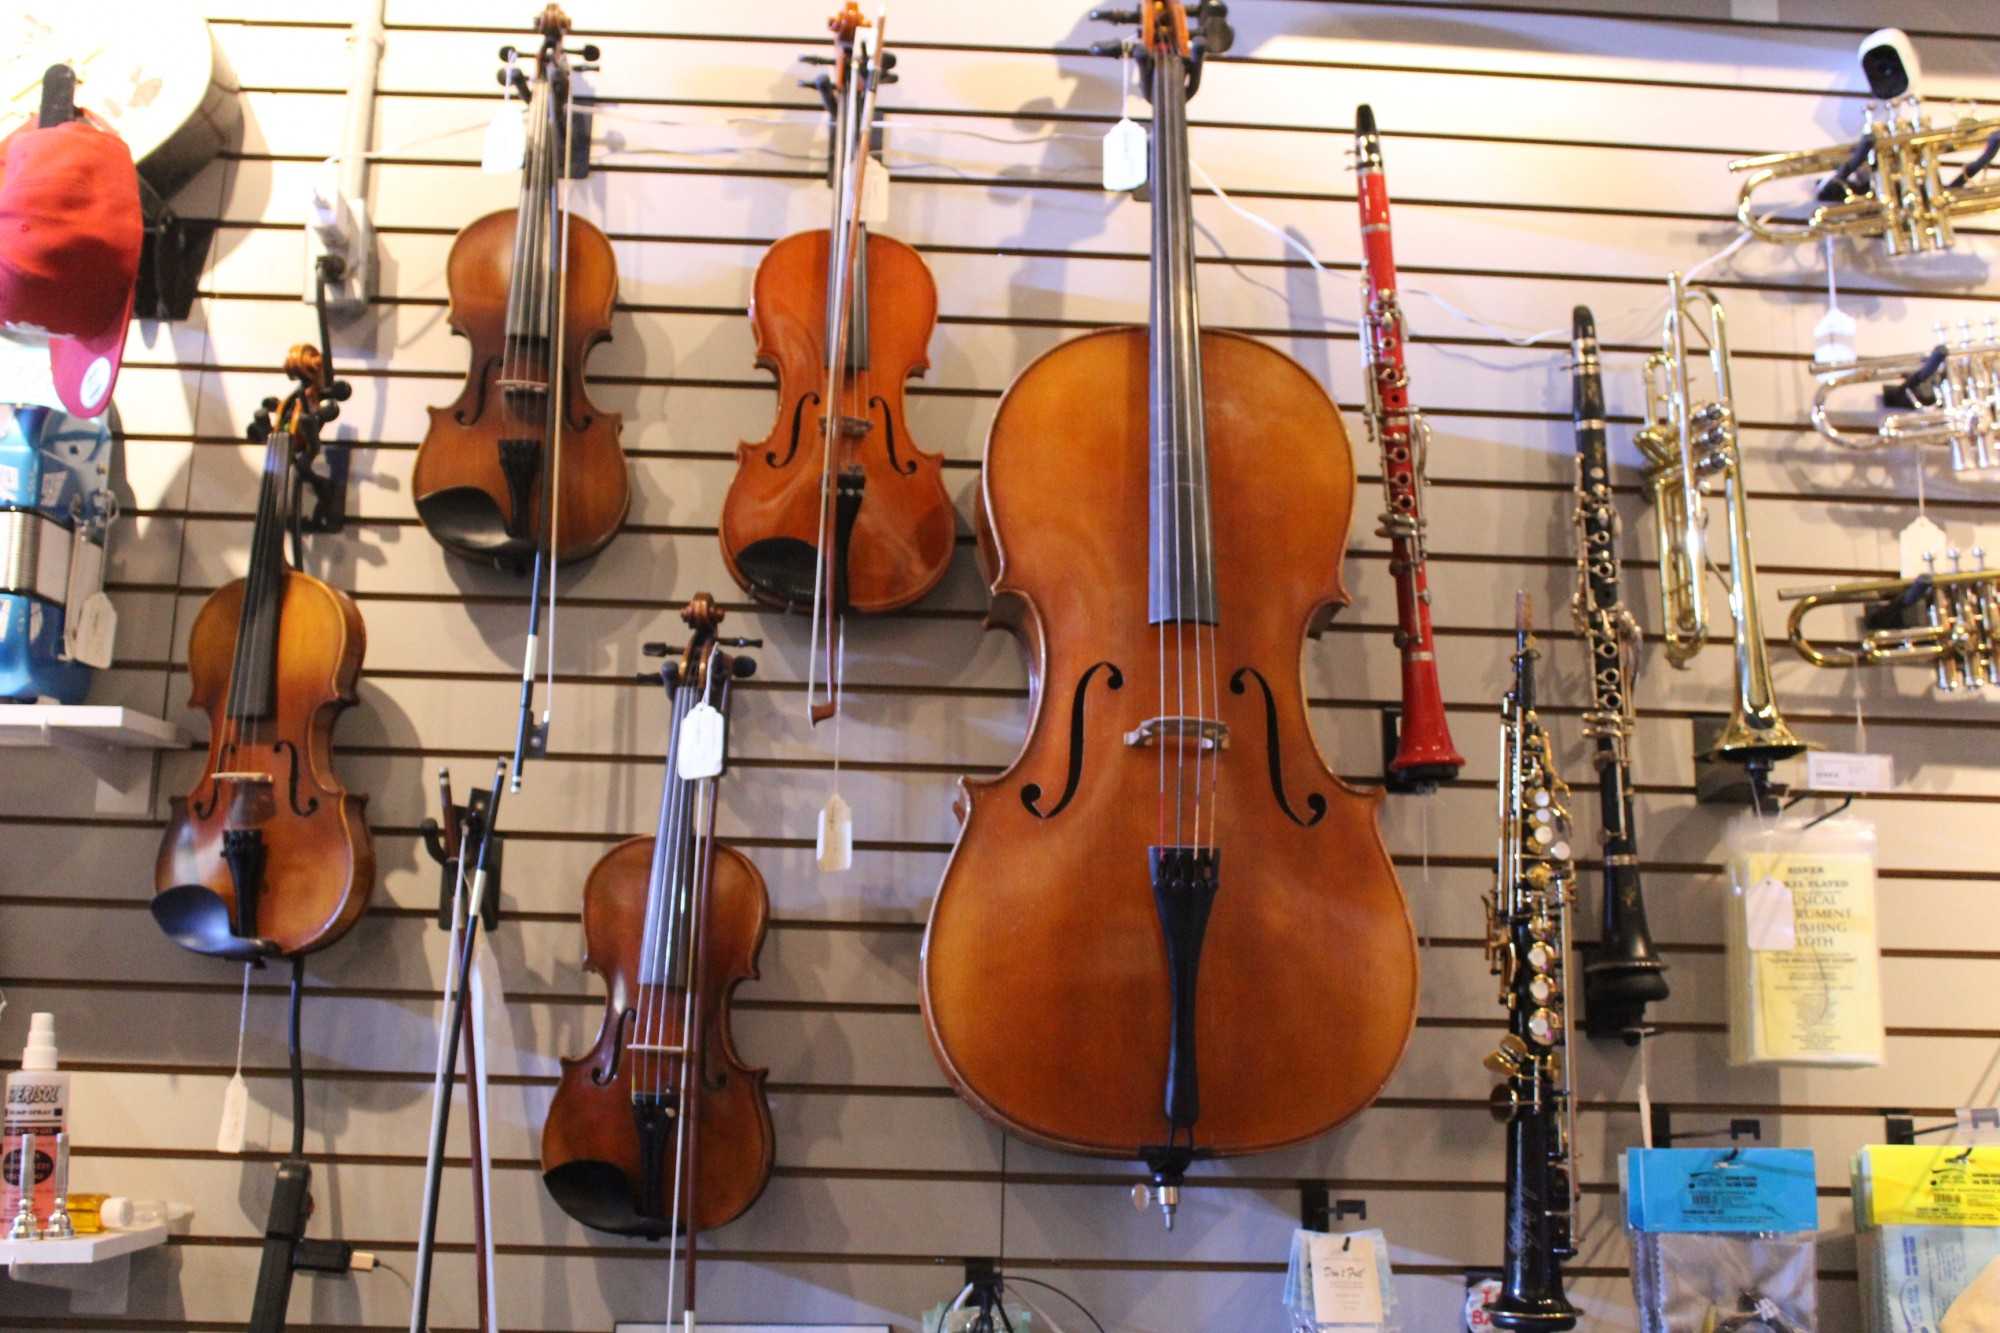 Chicago Music Store varies of Orchestra instruments such as Violins, Violas, and Cellos as well as Clarinets.